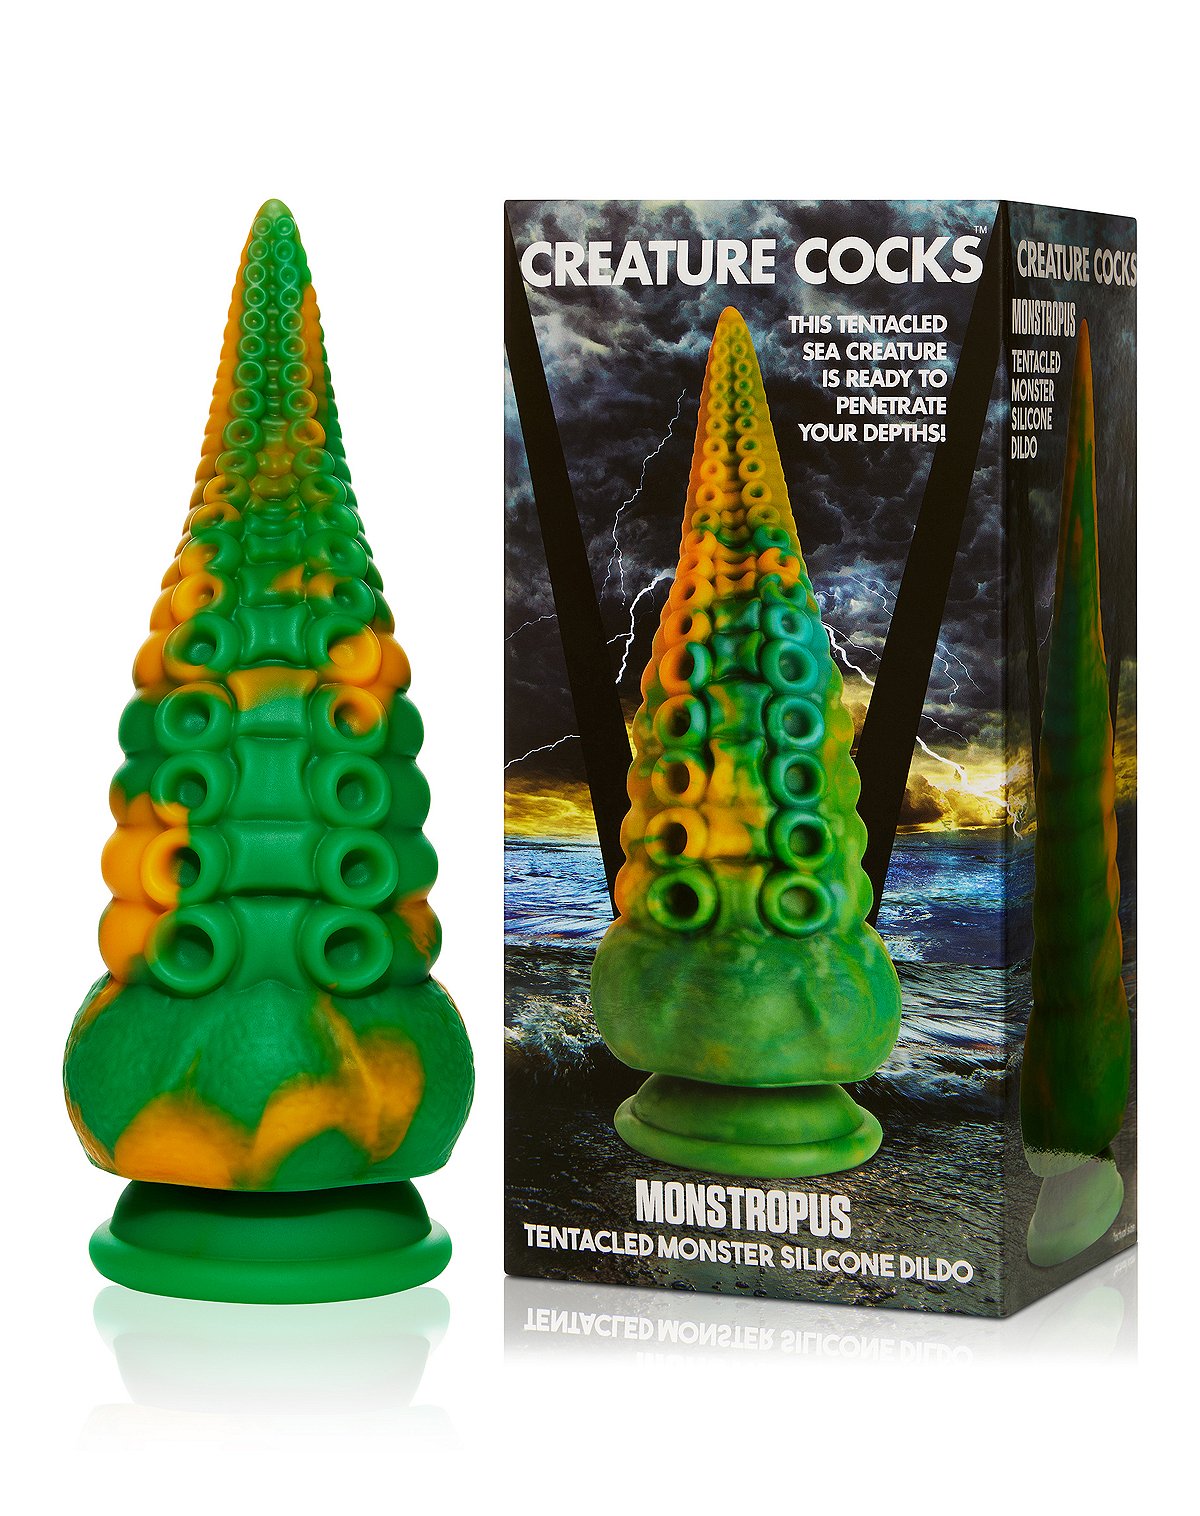 Monstropus Tentacled Monster Silicone Dildo 7.6 Inch - Creature Cocks